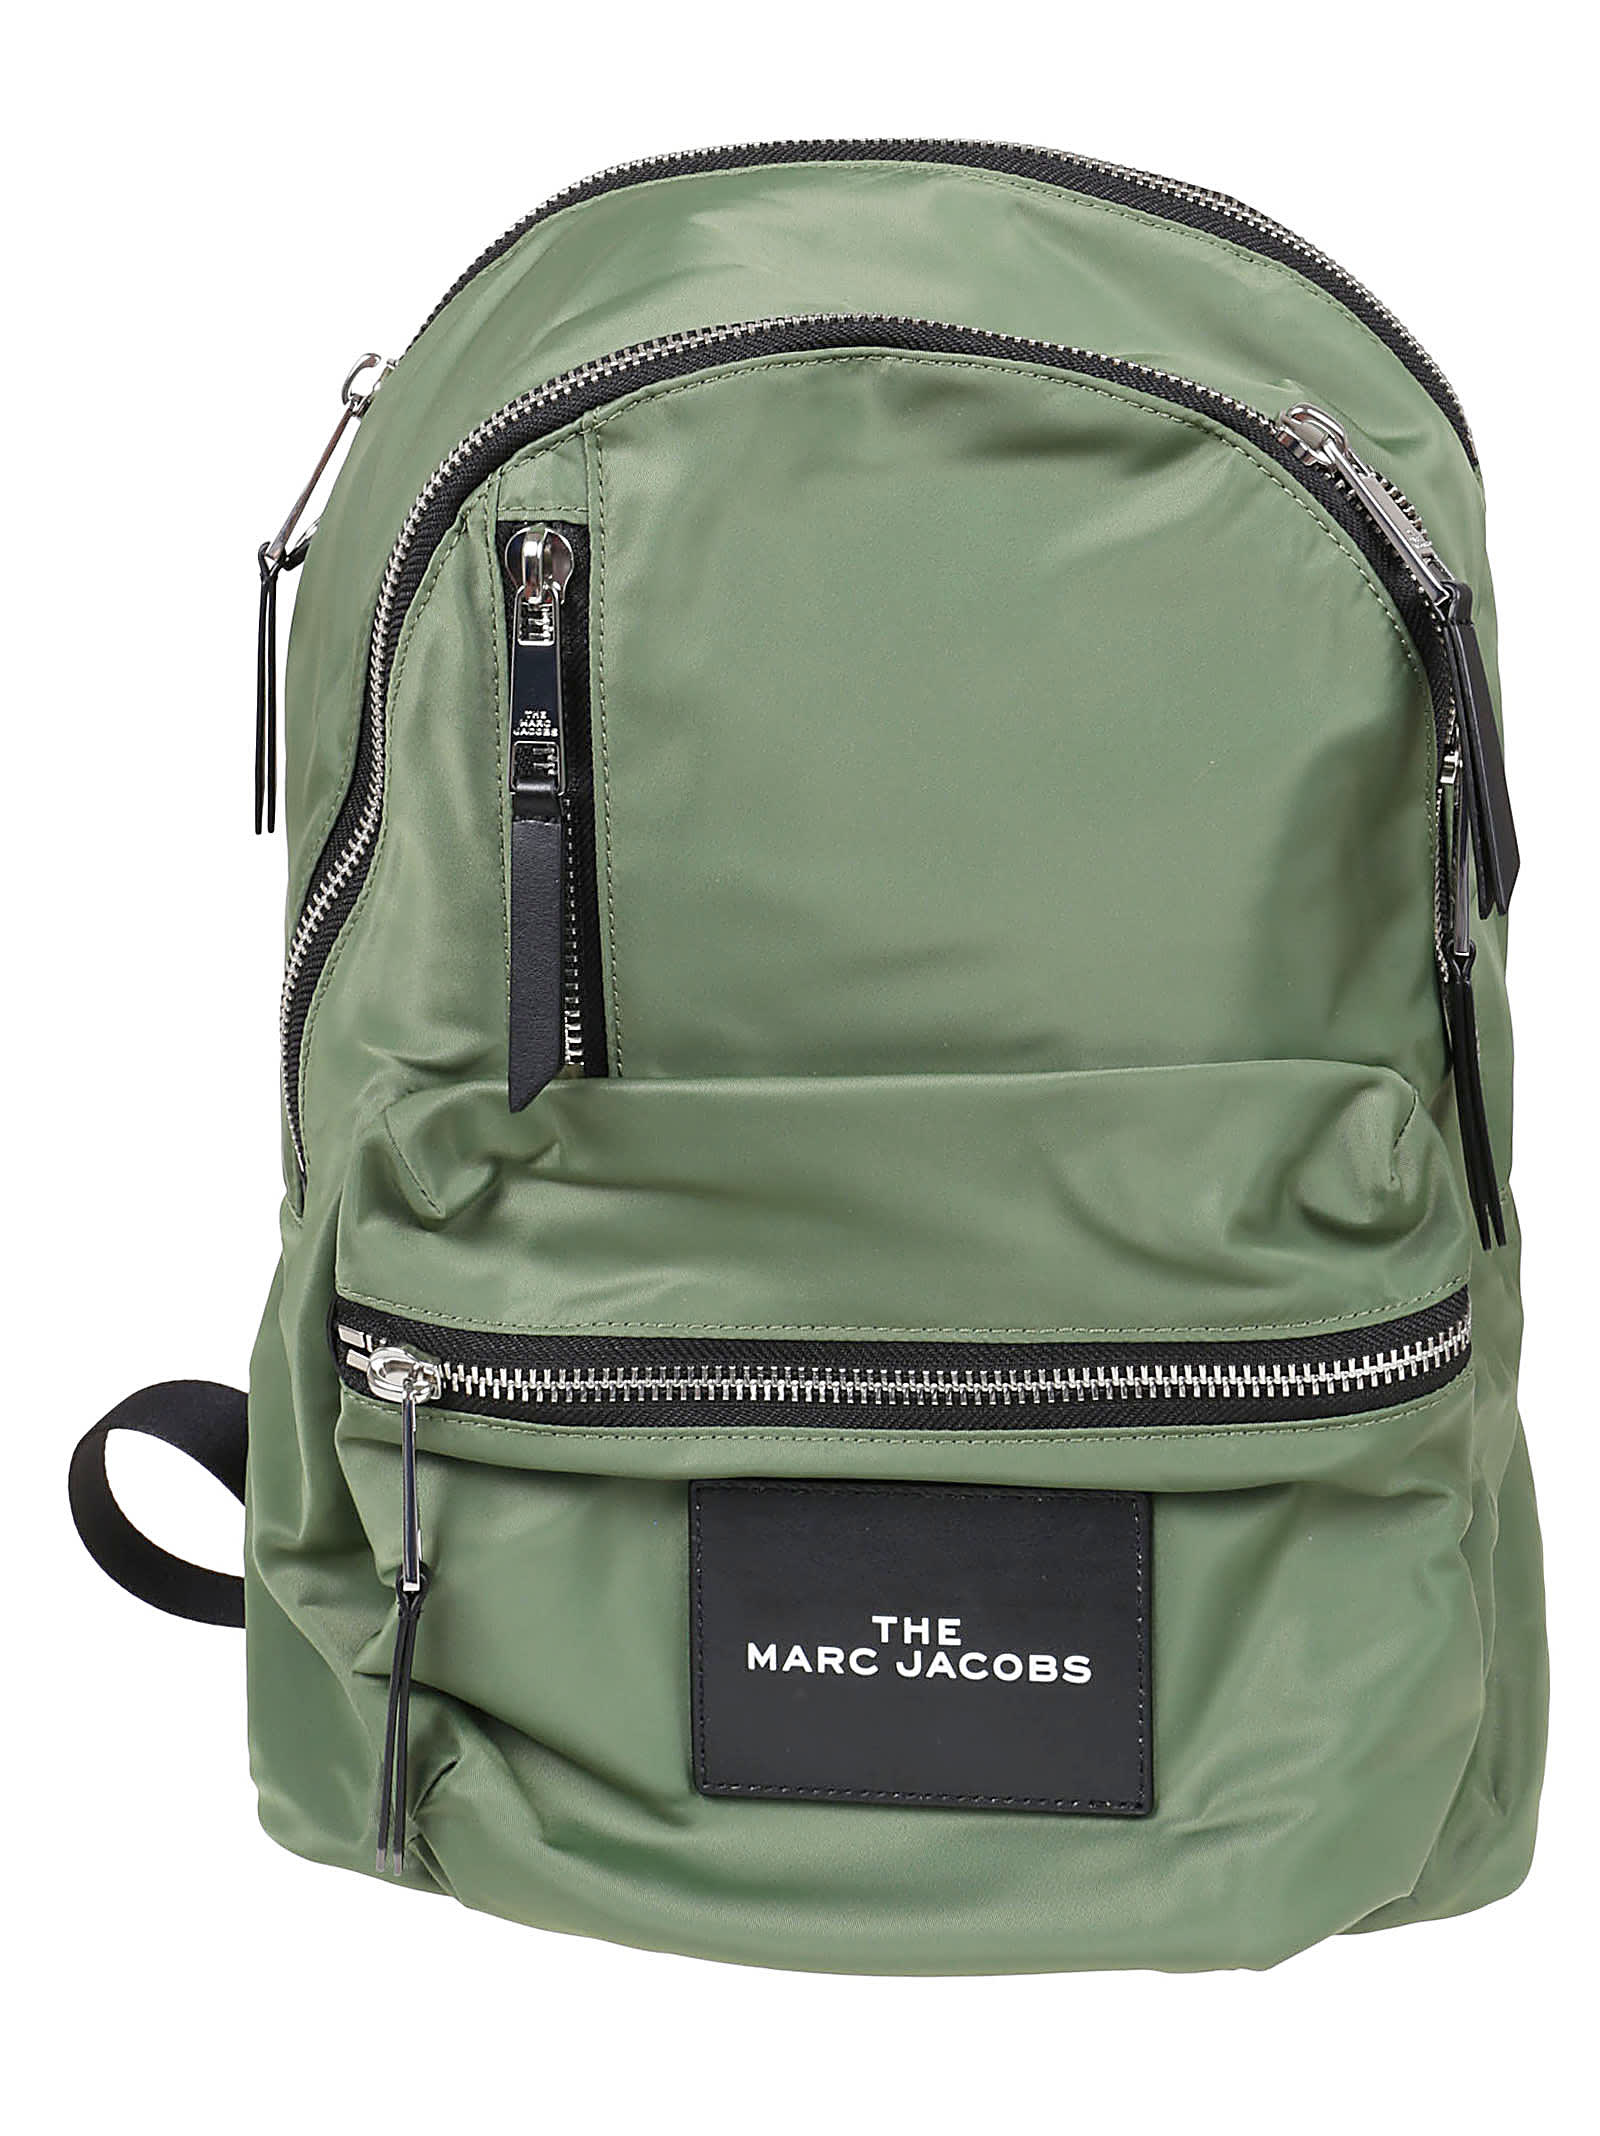 Marc Jacobs The Zip Backpack | italist